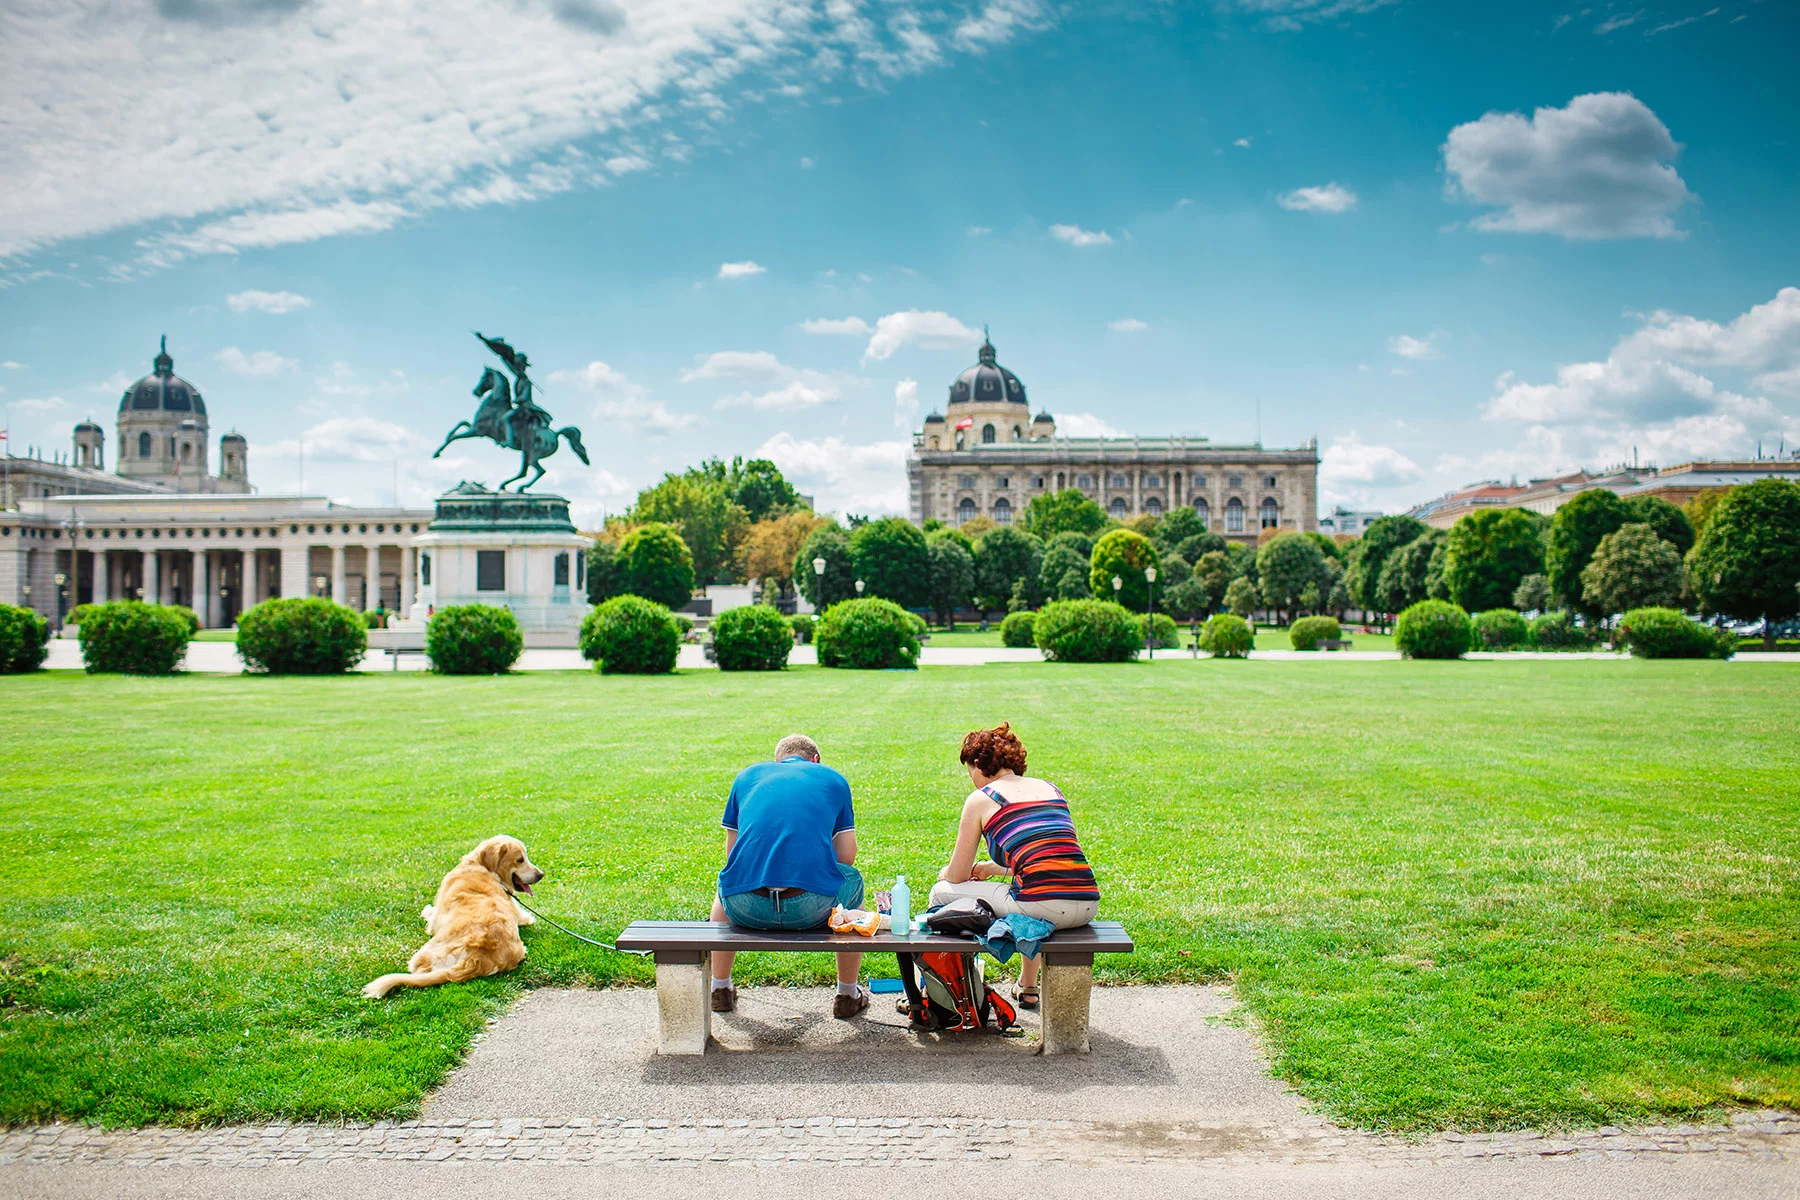 A dog with his owners in a Vienna park